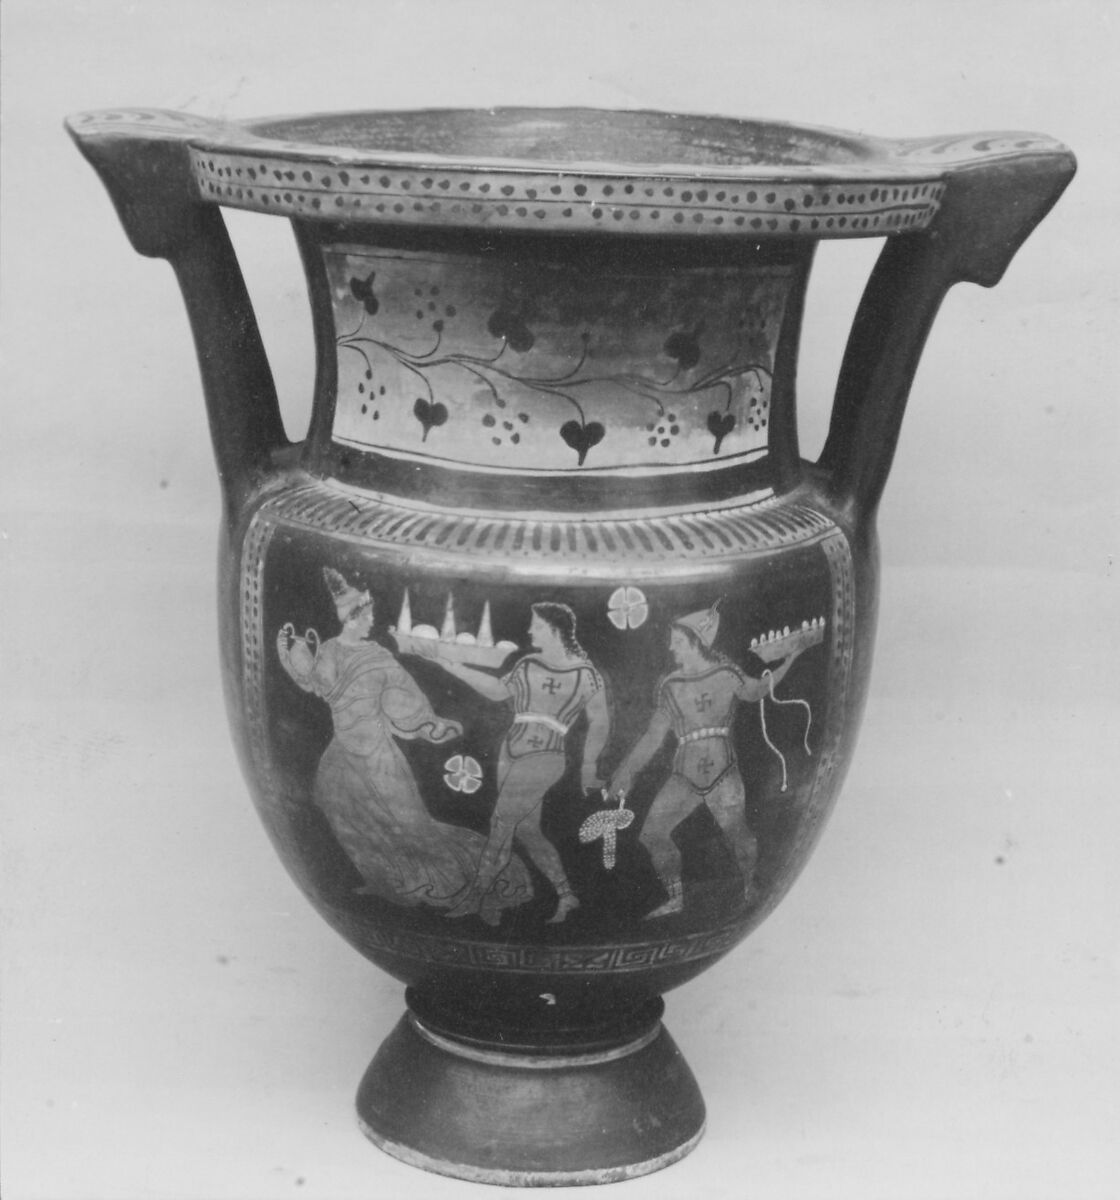 Terracotta column-krater (mixing bowl), Attributed to the Painter of the Bari Orestes, Terracotta, Greek, South Italian, Apulian 